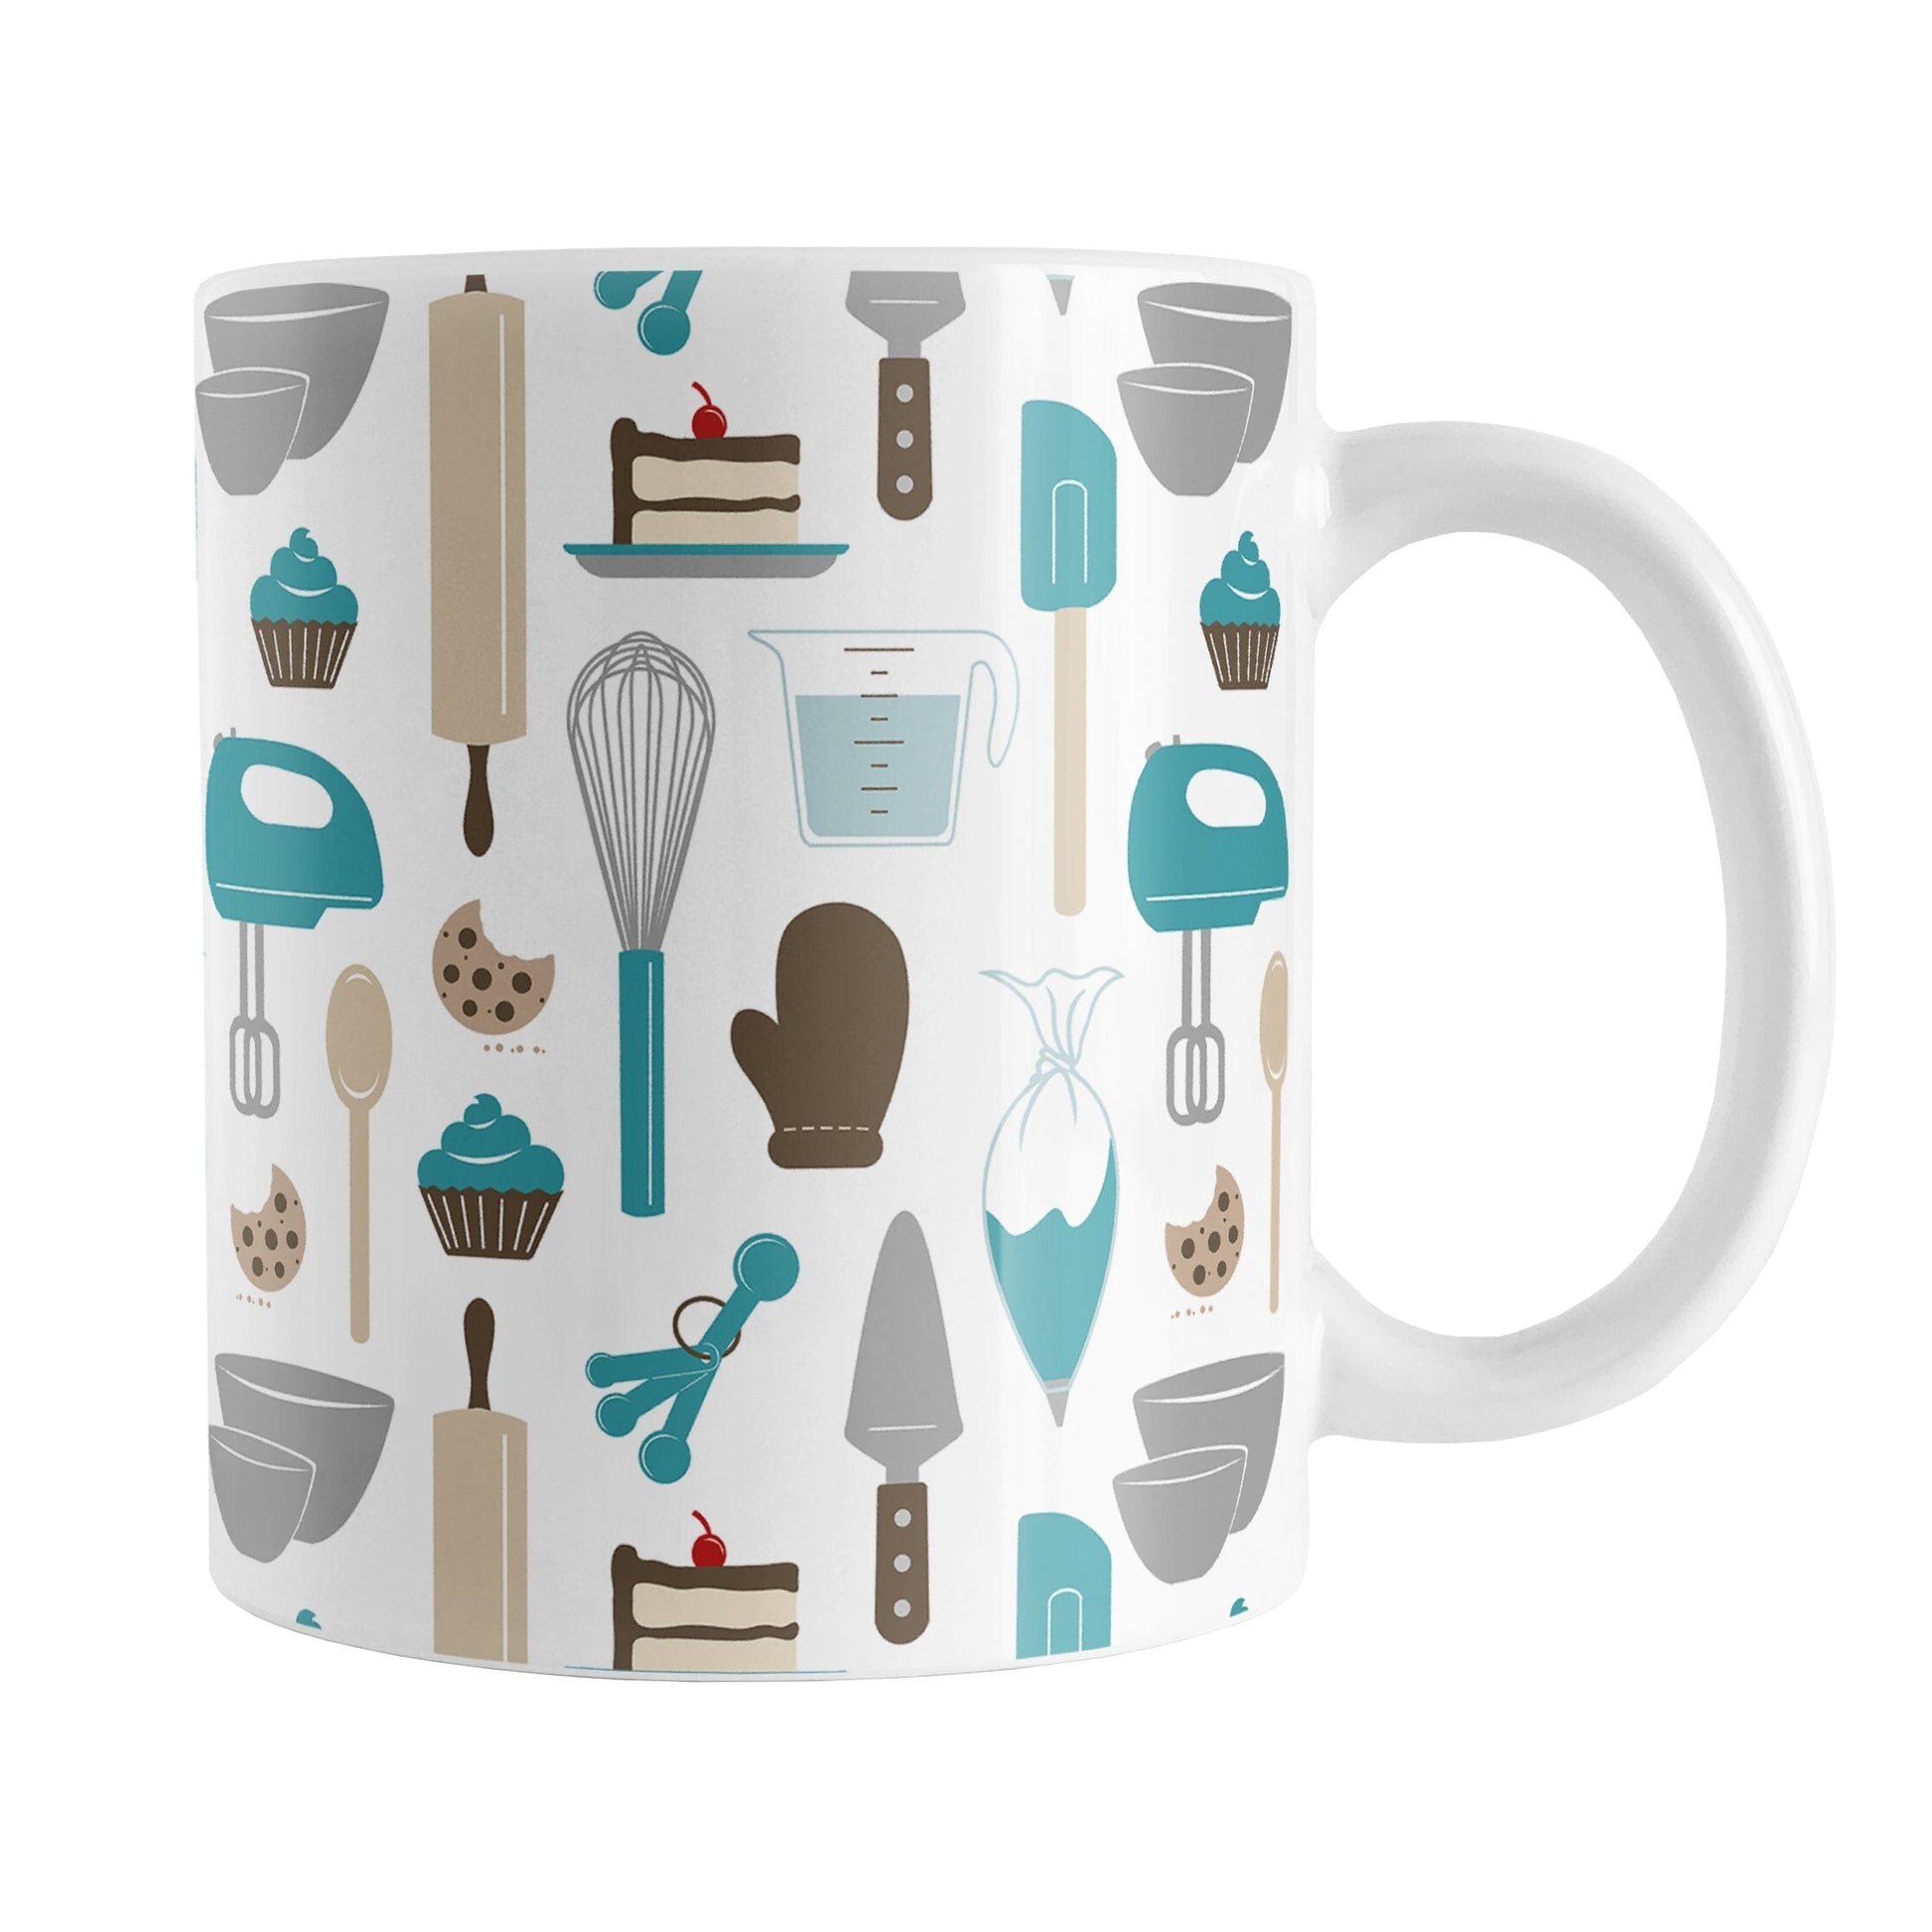 Turquoise Baking Pattern Mug (11oz) at Amy's Coffee Mugs. A ceramic coffee mug designed with a pattern of baking tools like spatulas, whisks, mixers, bowls, and spoons, with cookies, cupcakes, and cake all in a turquoise, gray, brown, and beige color scheme that wraps around the mug.